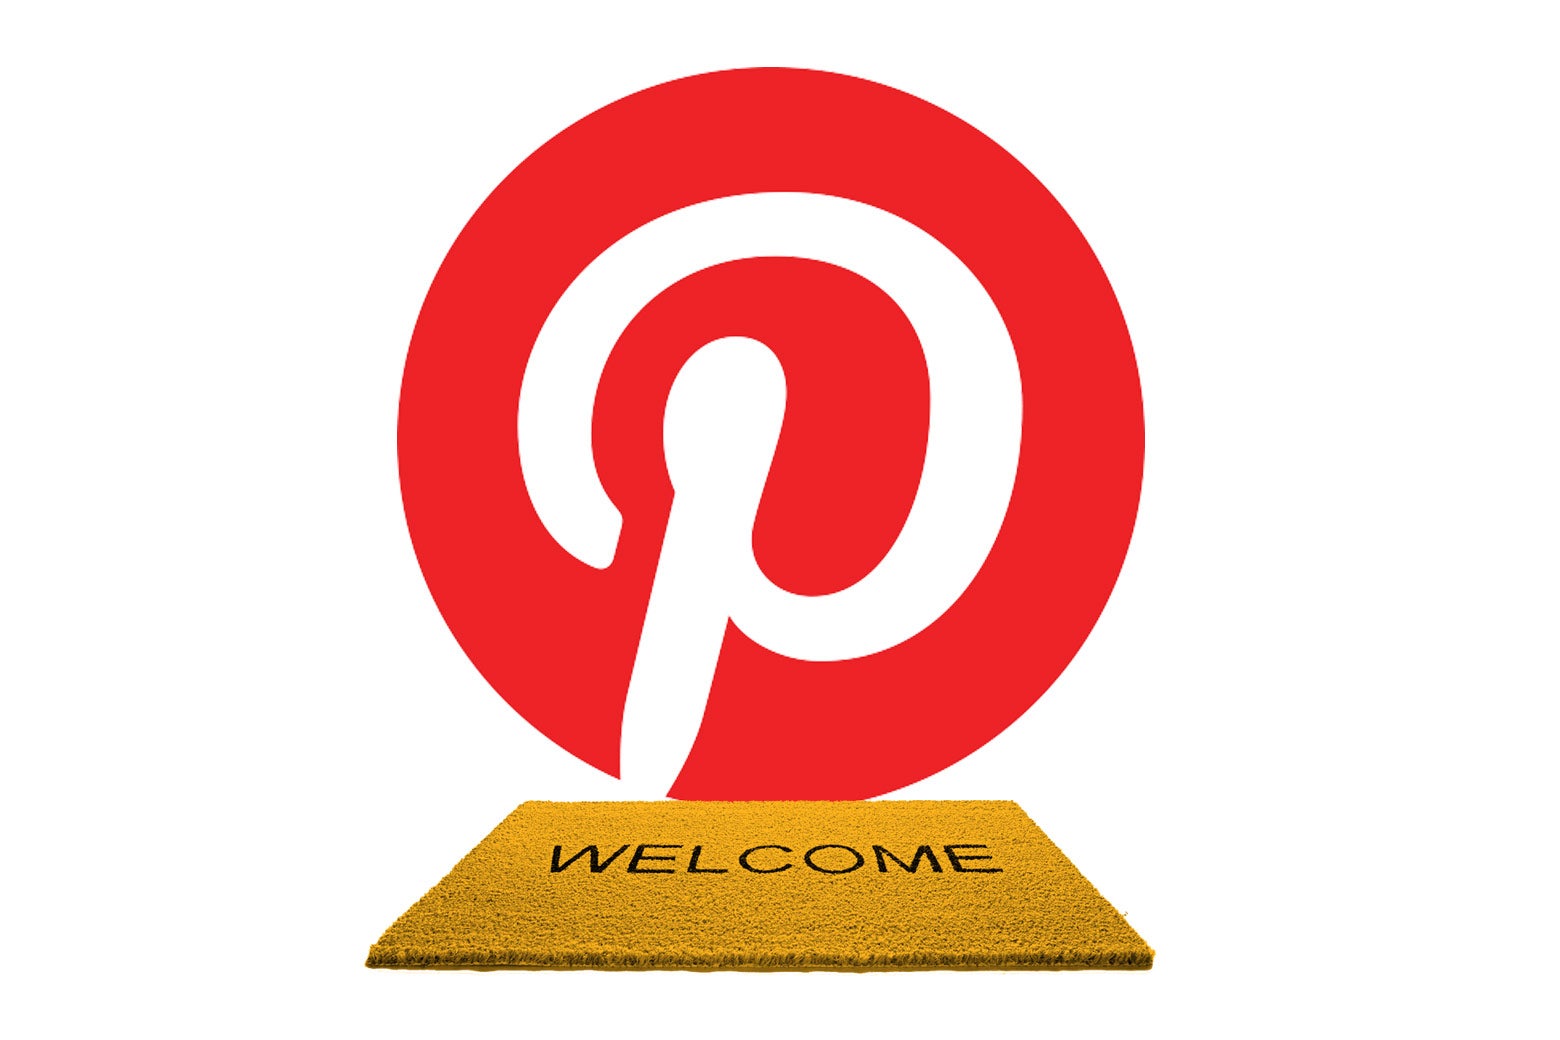 Welcome mat in front of Pinterest logo.